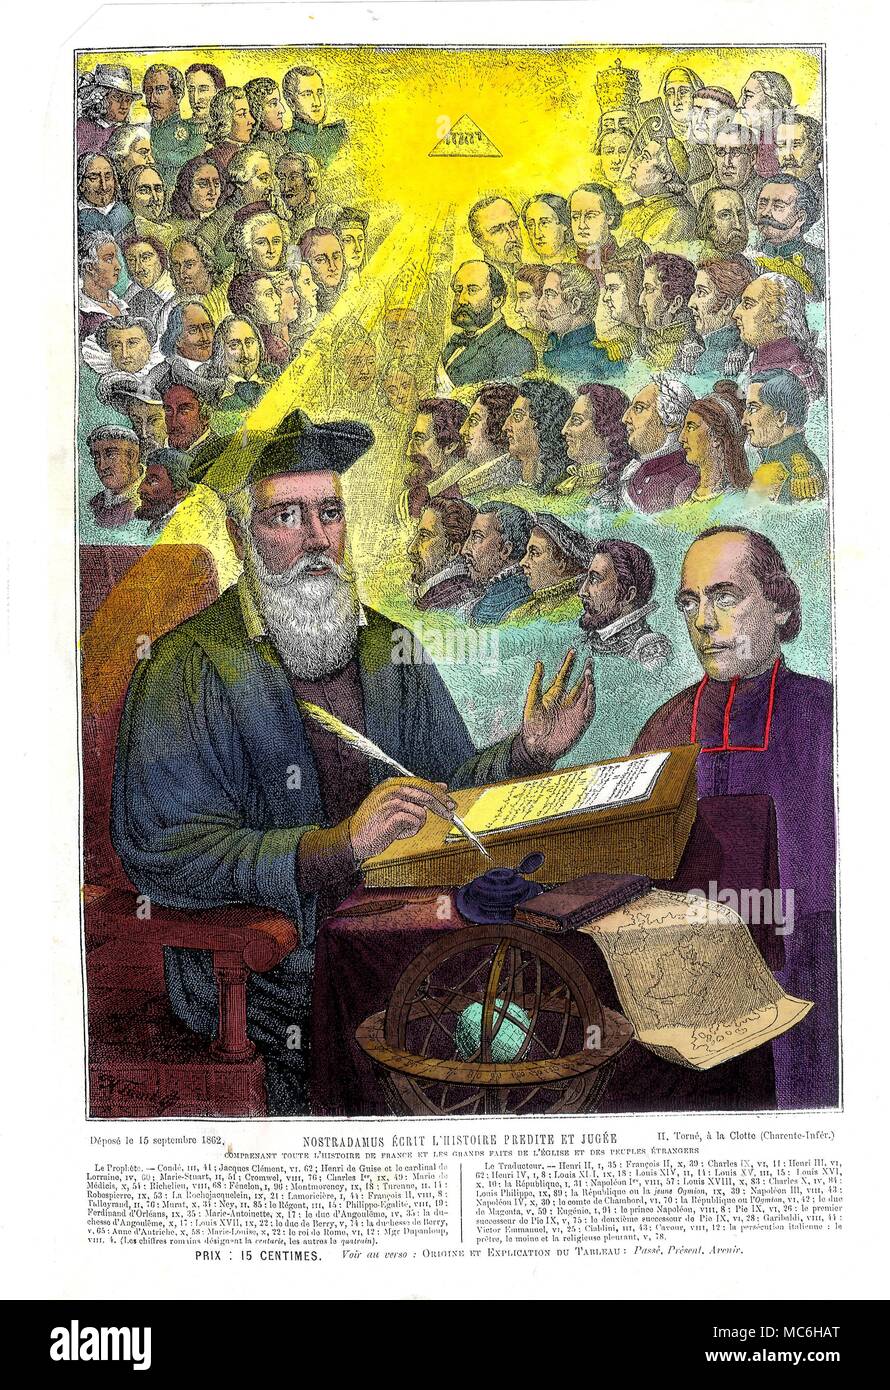 NOSTRADAMUS - PORTRAIT Portrayal of the seer, Michel Nostradamus, predicting the future, or 'writing History which is at once predicted and judged'. Hand coloured lithograph of 1862, printed for the AbbÃš TornÃš, one of the important nineteenth century commentators on Nostradamus. The print was sold independently of TornÃš books on Nostradamus. The picture portrays the AbbÃš staring in adoration at Nostradamus, whose head is illumined (presumably as the source of his inspiration, or prophetic power) by a ray of light emitted from a radiant Masonic triangle containing the Tetragrammaton, o Stock Photo